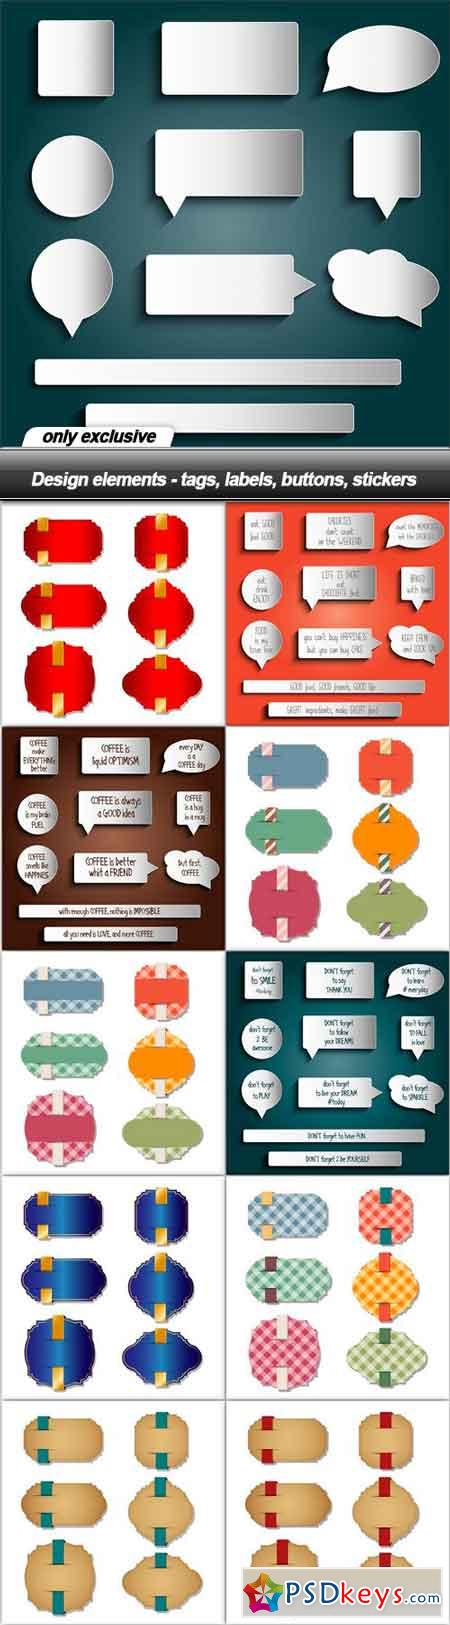 Design elements - tags, labels, buttons, stickers - 11 EPS